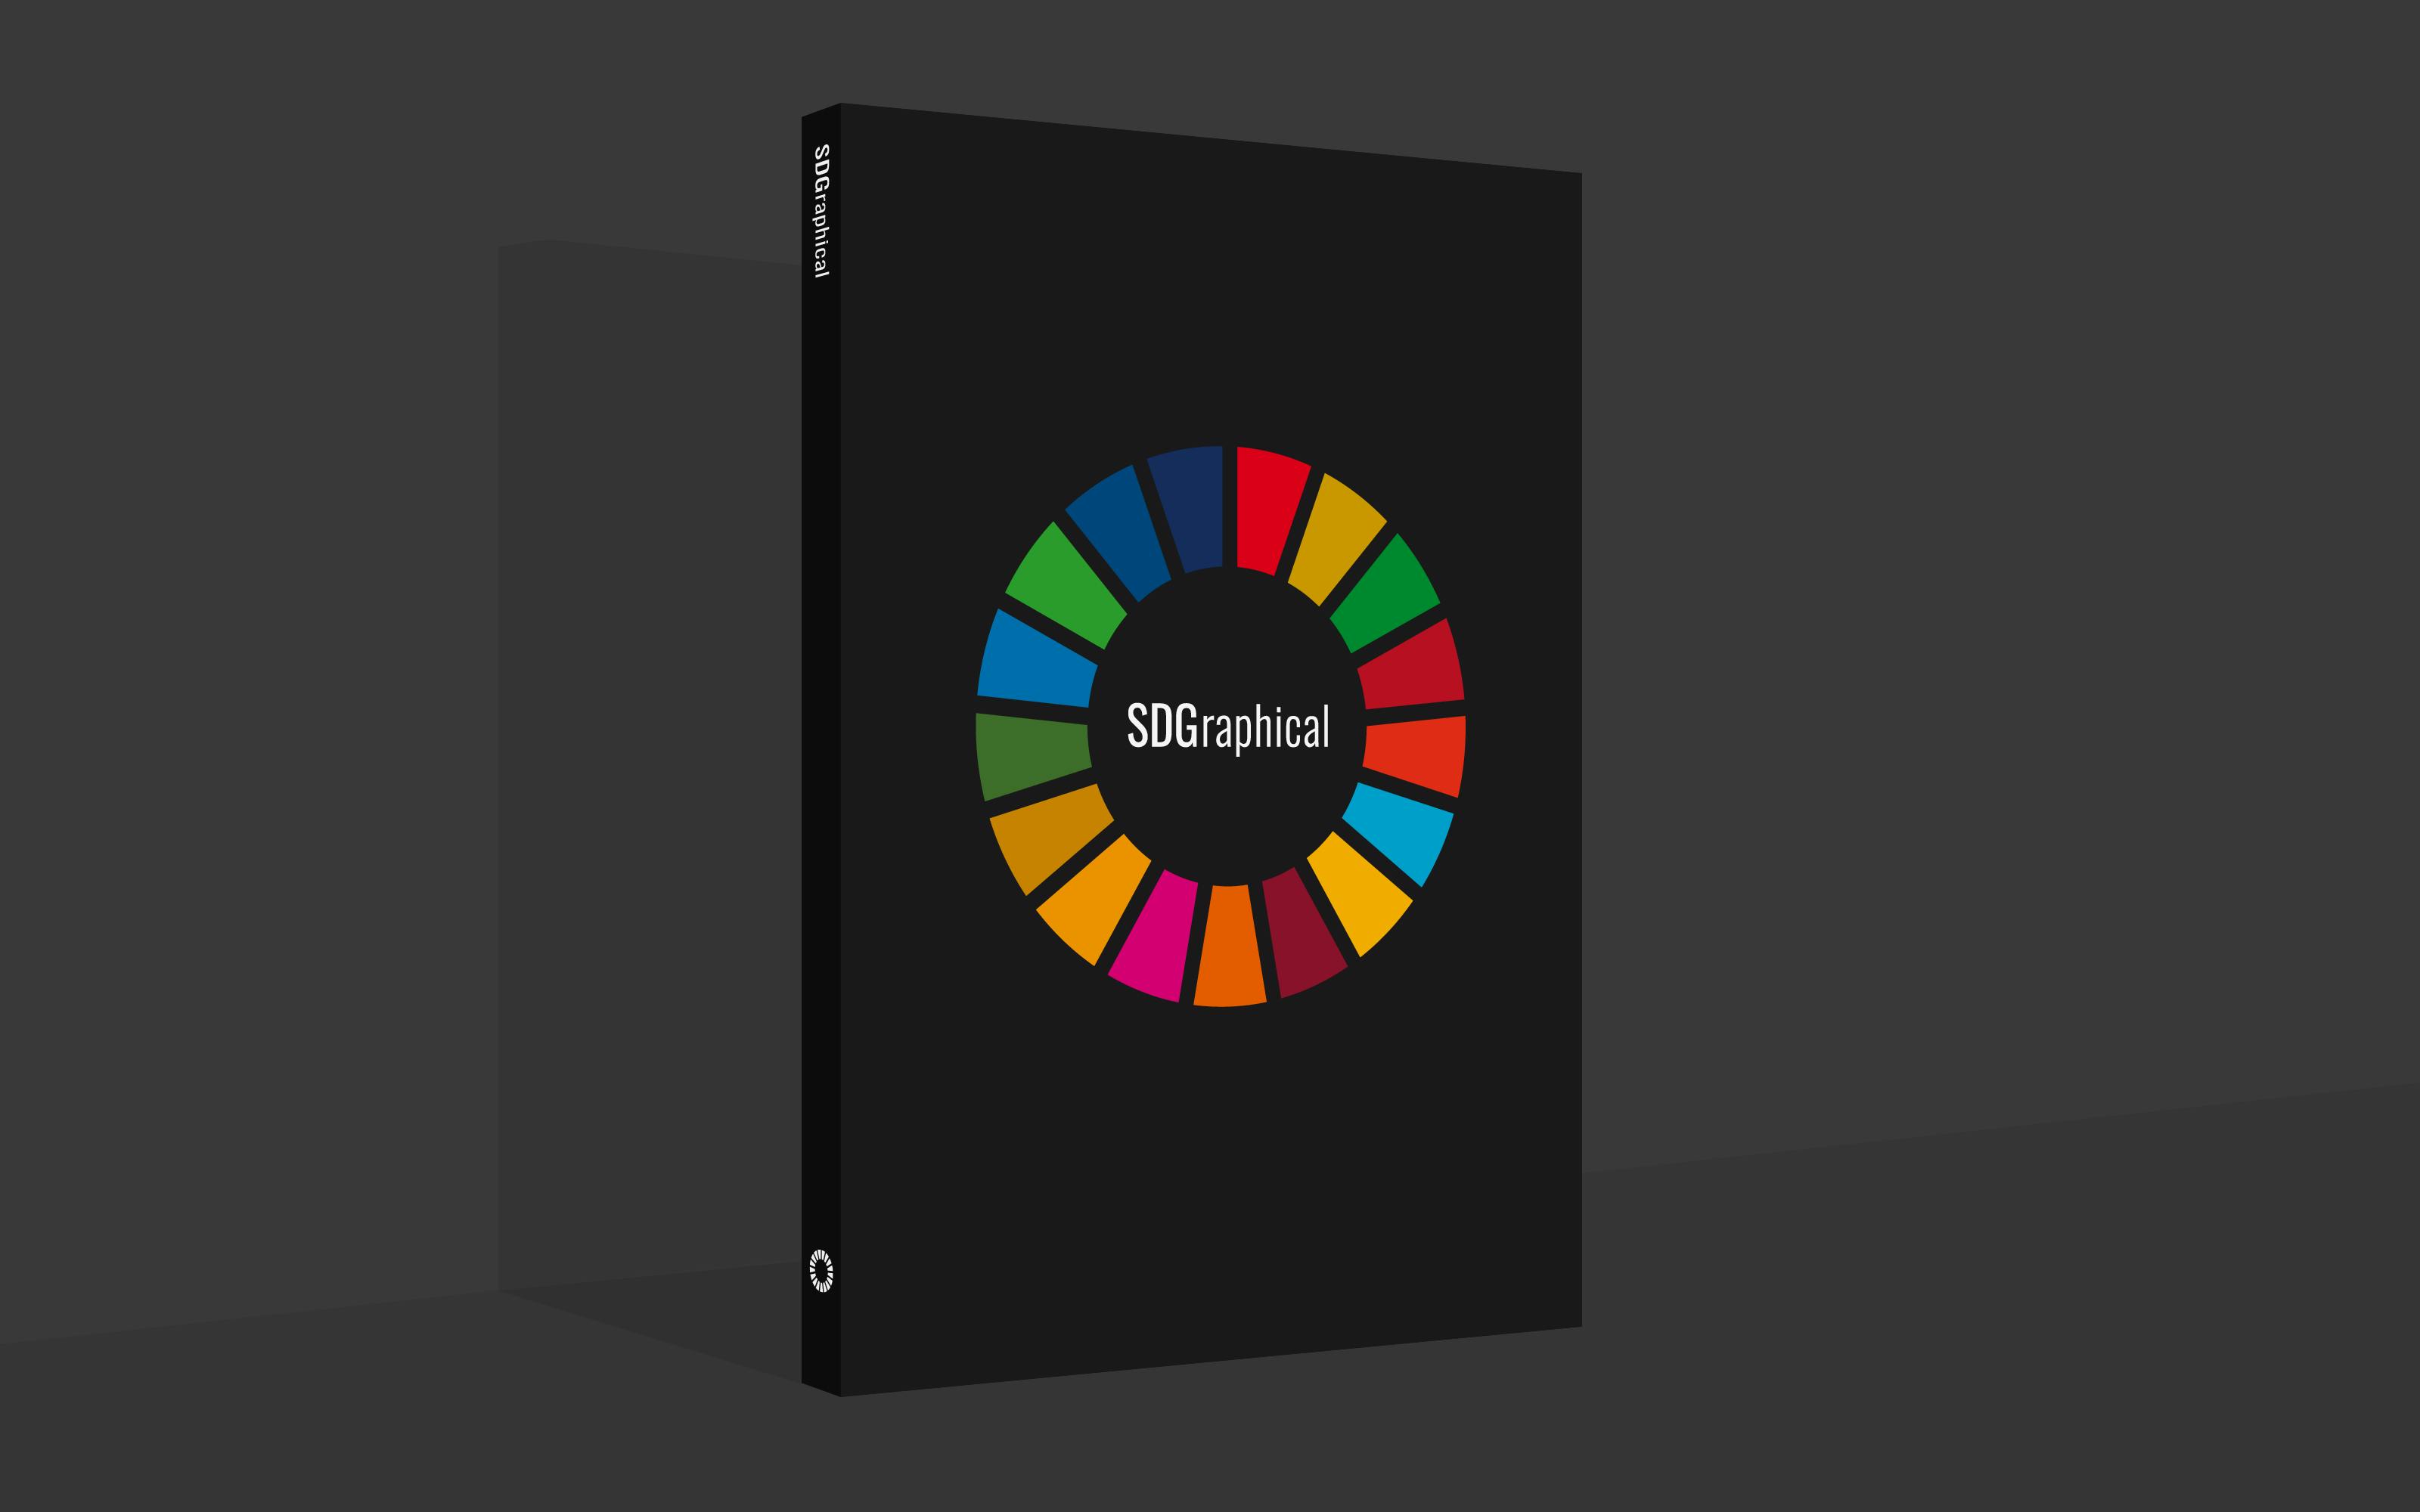 The 2030 Agenda for Sustainable Development was adopted by the United Nations in september 2015. Statistical data is a key element in the review of the 17 Sustainable Development Goals that set the agenda's target direction. How can data visualization help make this complex data accessible to a wide audience?